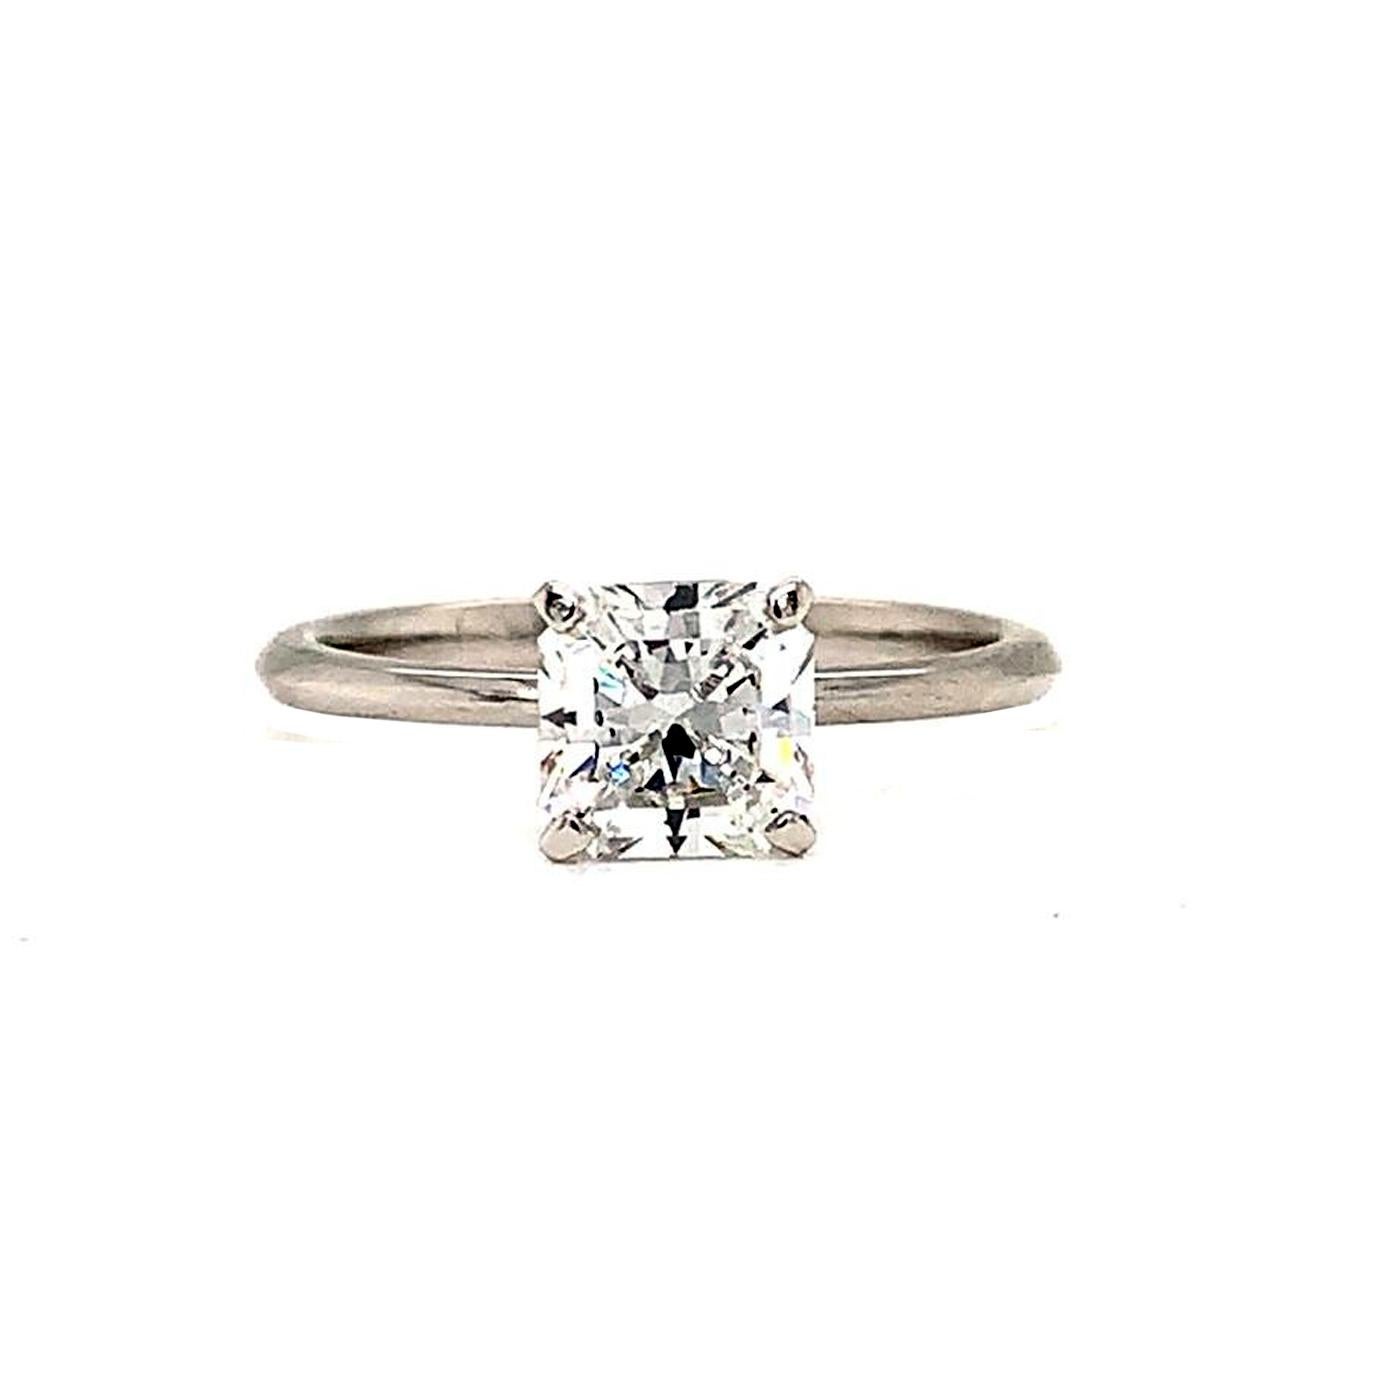 Say yes to this gorgeous diamond solitaire engagement ring from Tiffany & Co.! This classic, Tiffany-style diamond solitaire ring is the epitome of timeless elegance. The brilliant square, the icy white diamond sparkles radiantly on the finger,